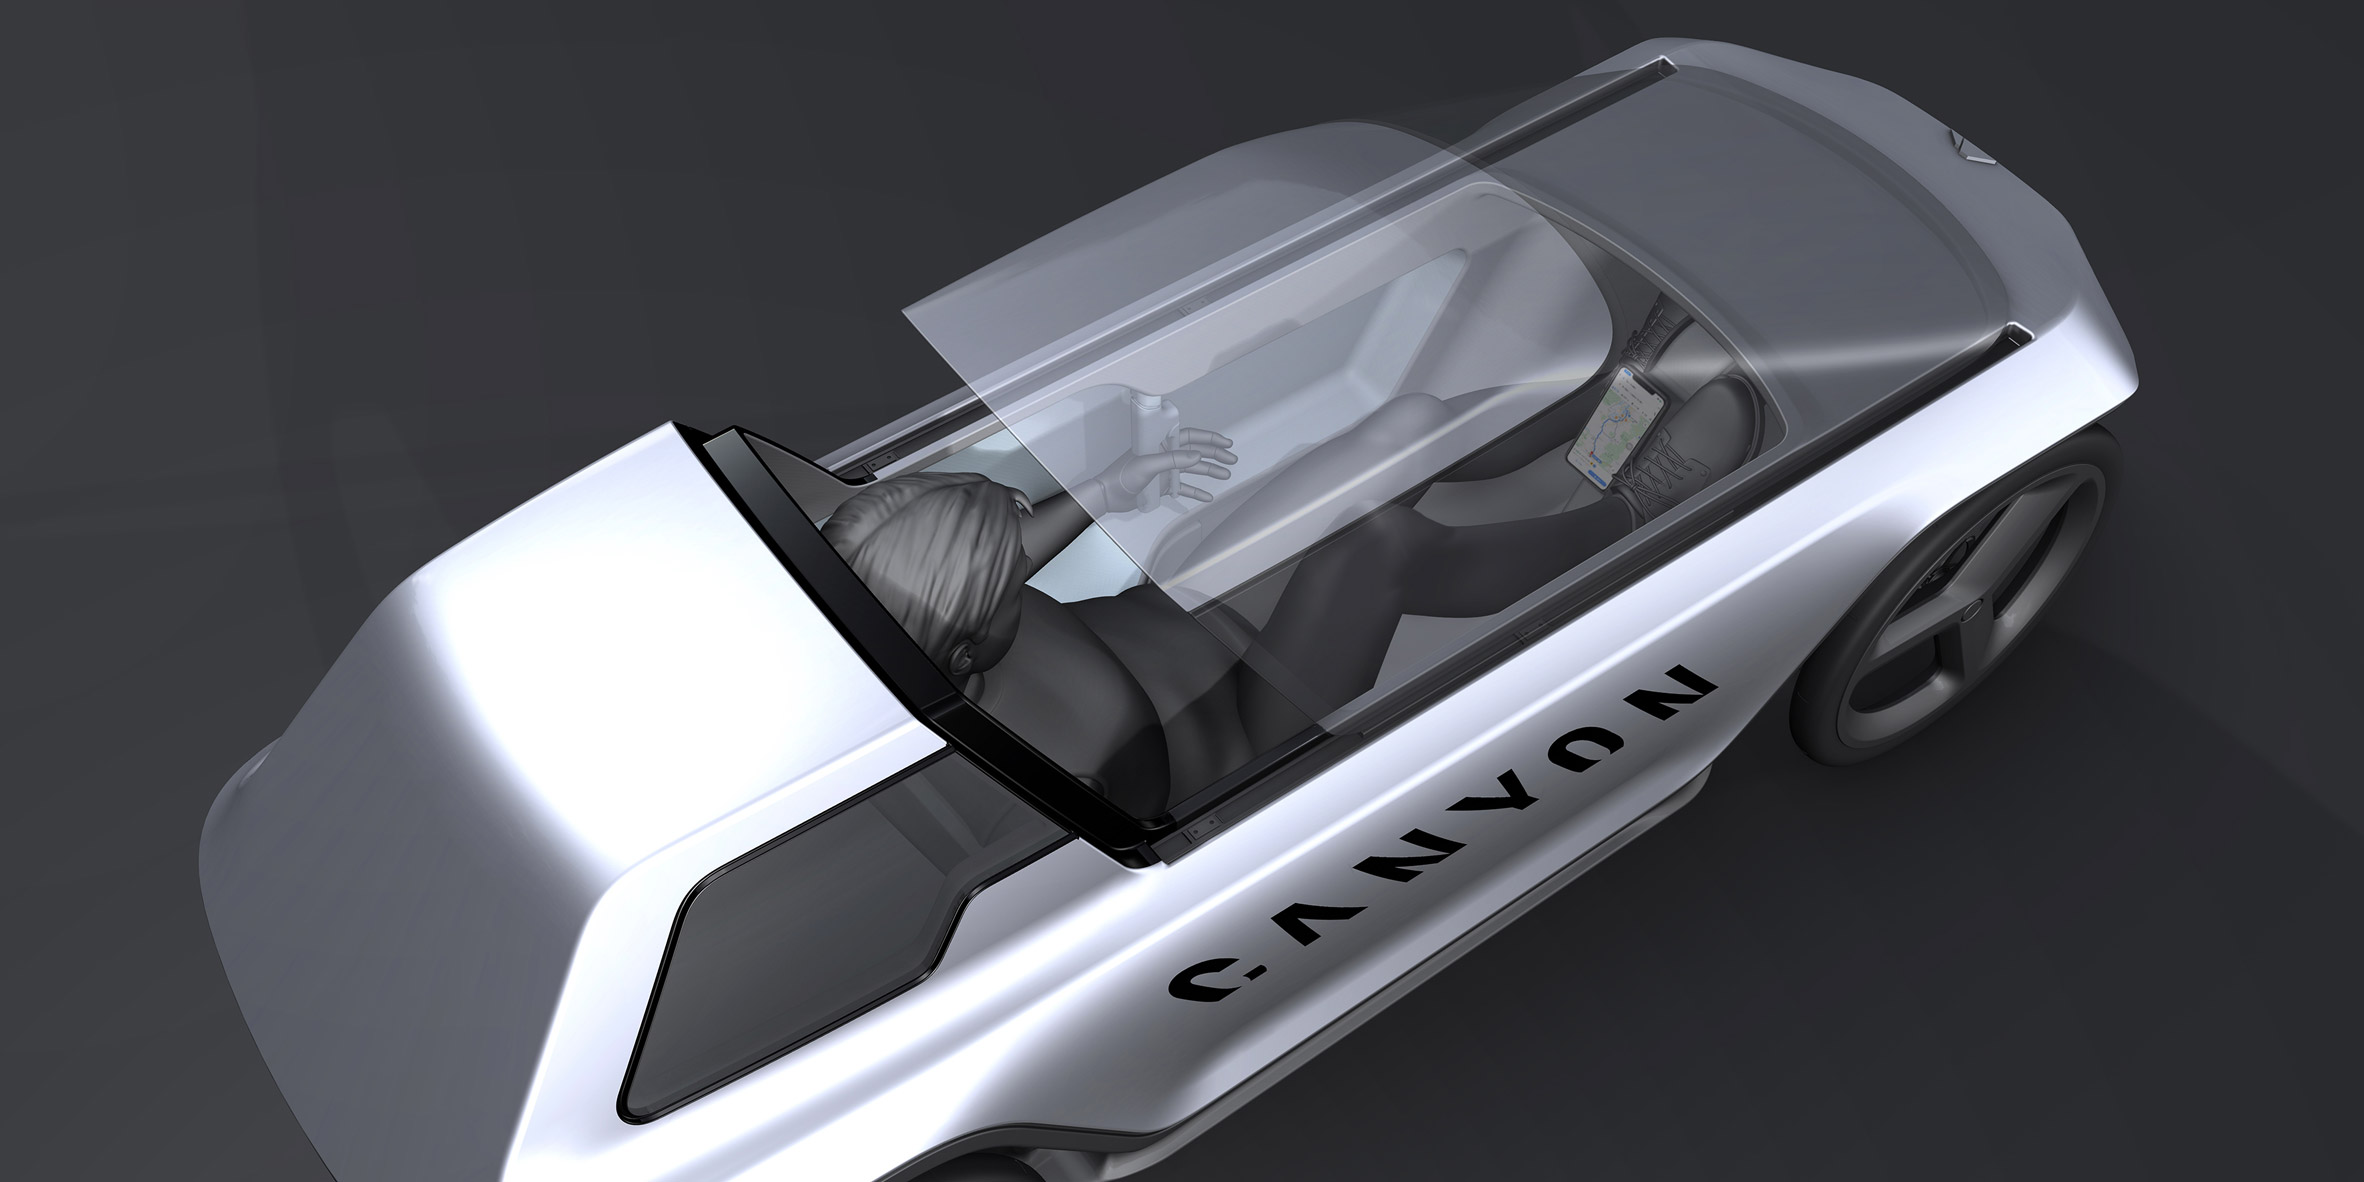 Canyon unveils "revolutionary" pedal-powered concept vehicle